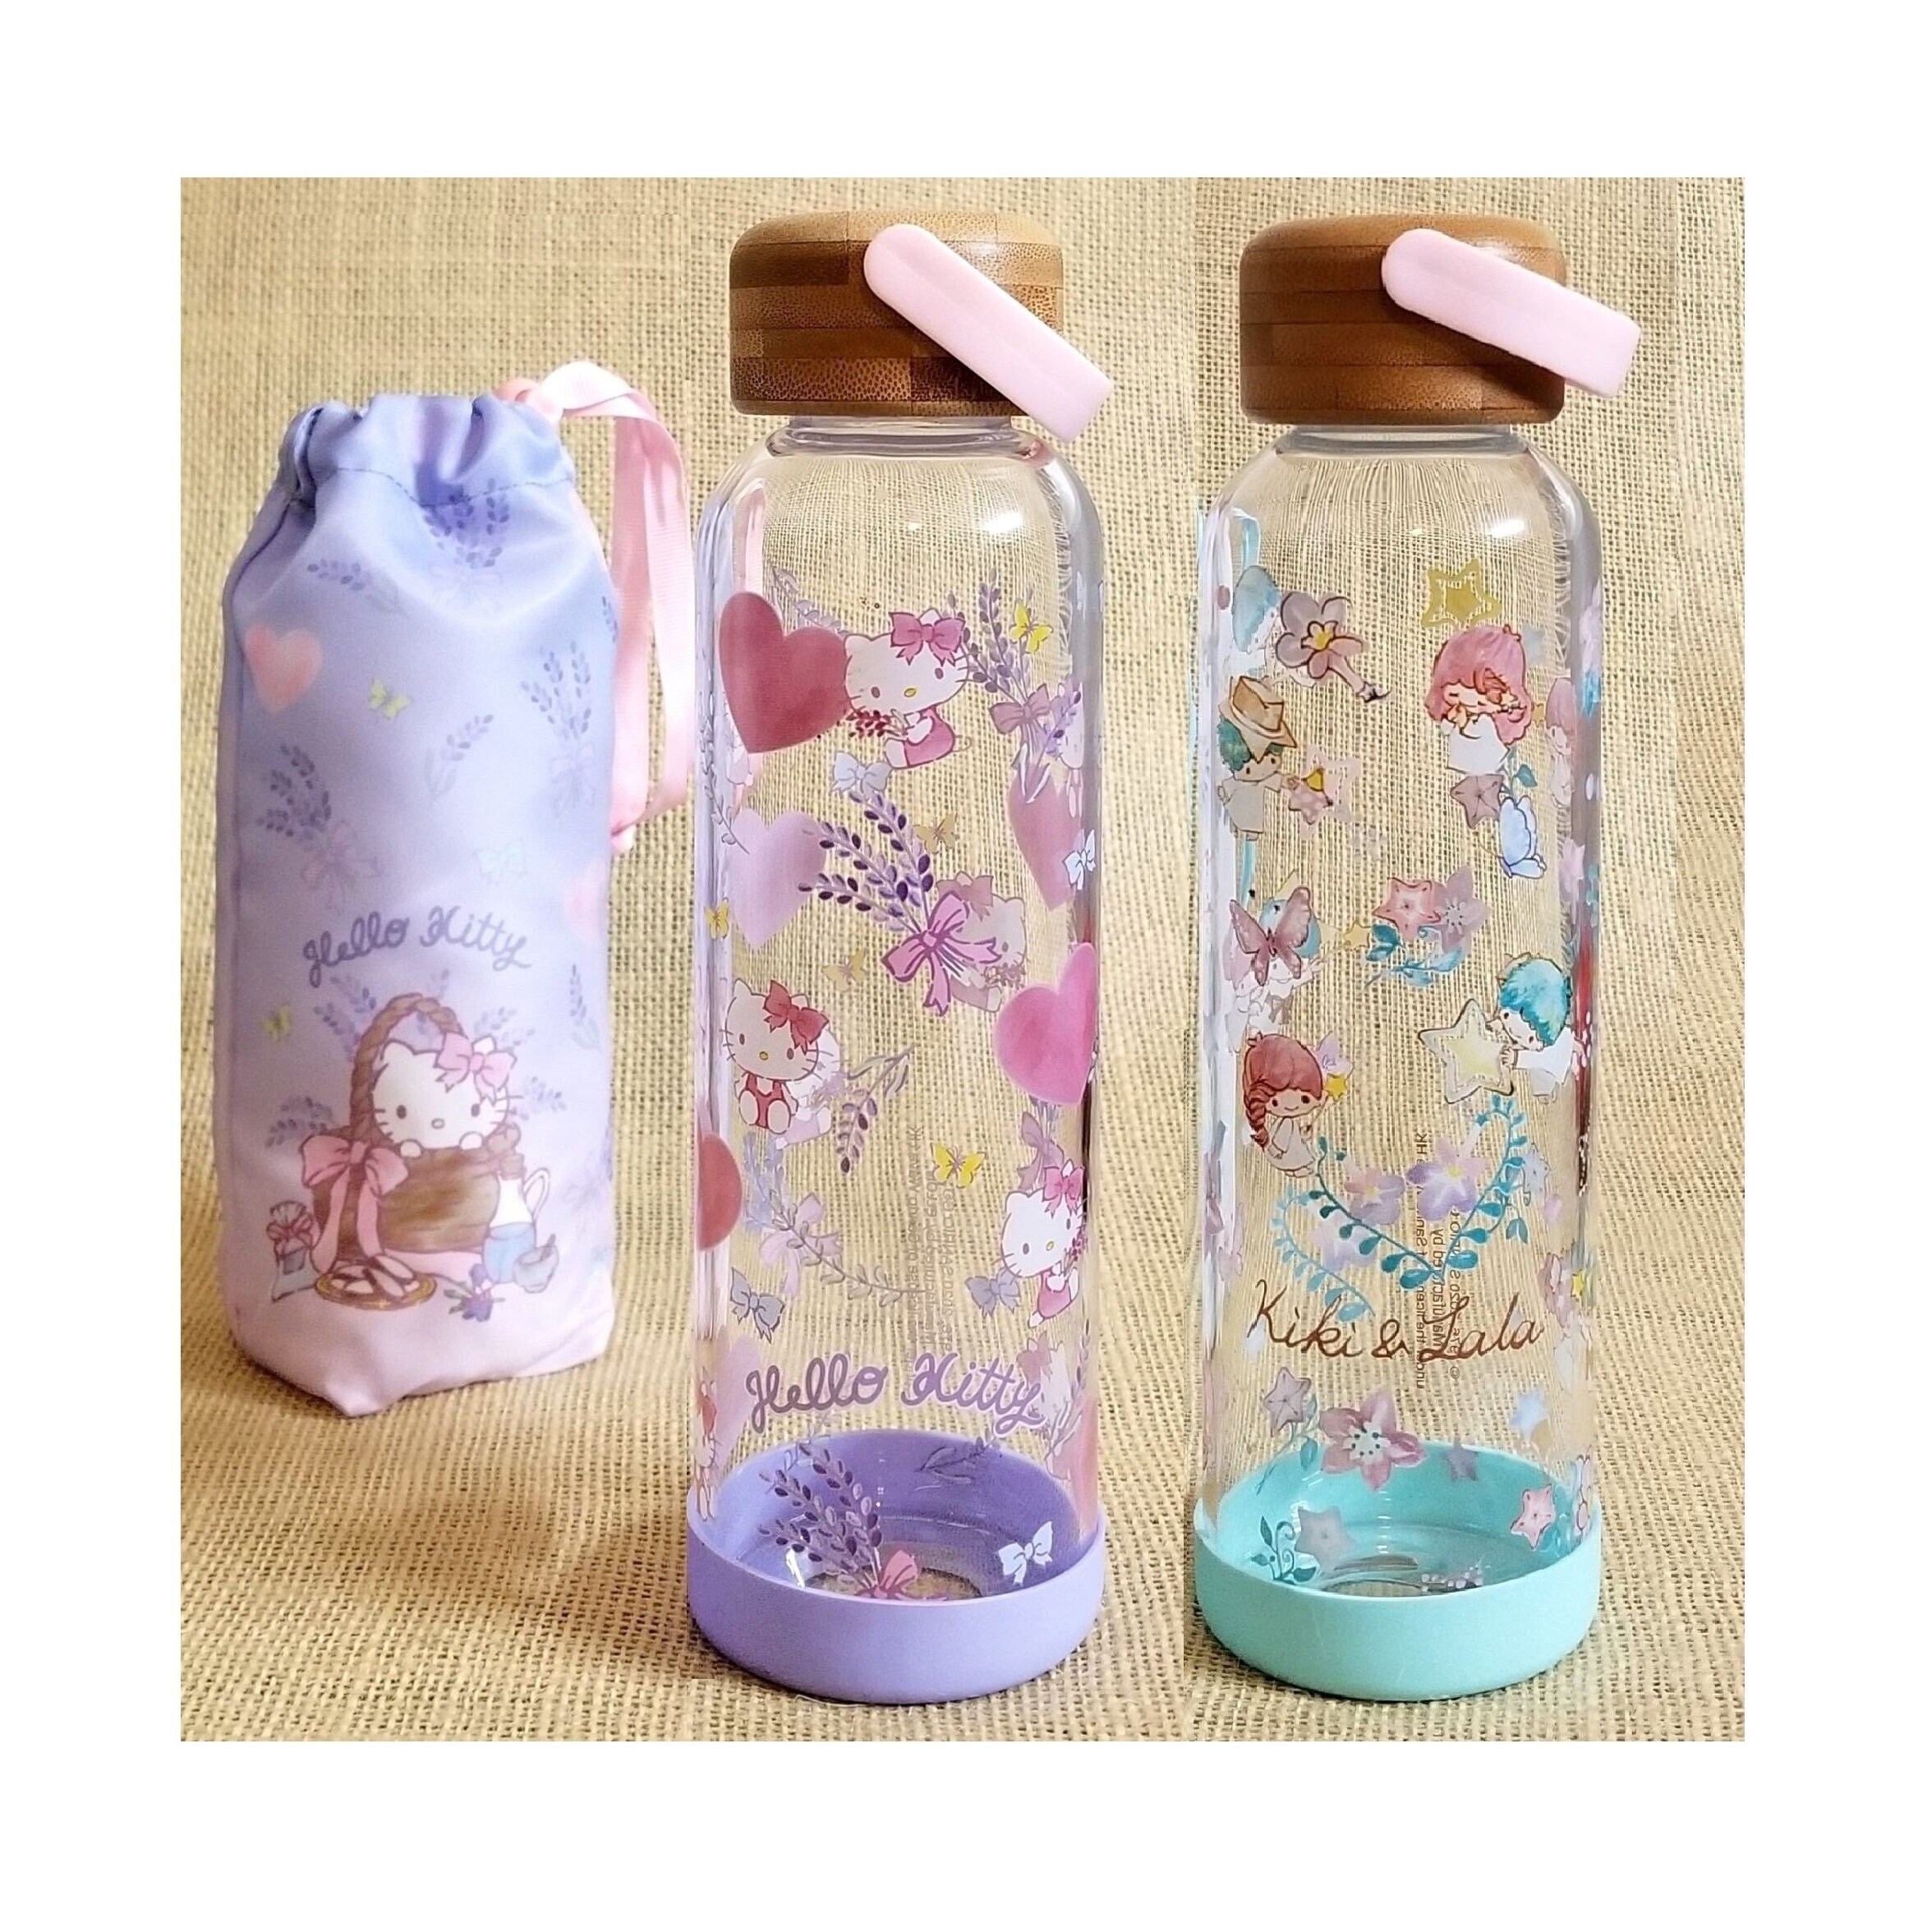 Sanrio Characters Mini Thermos Tumbler Water Bottle (1PC)